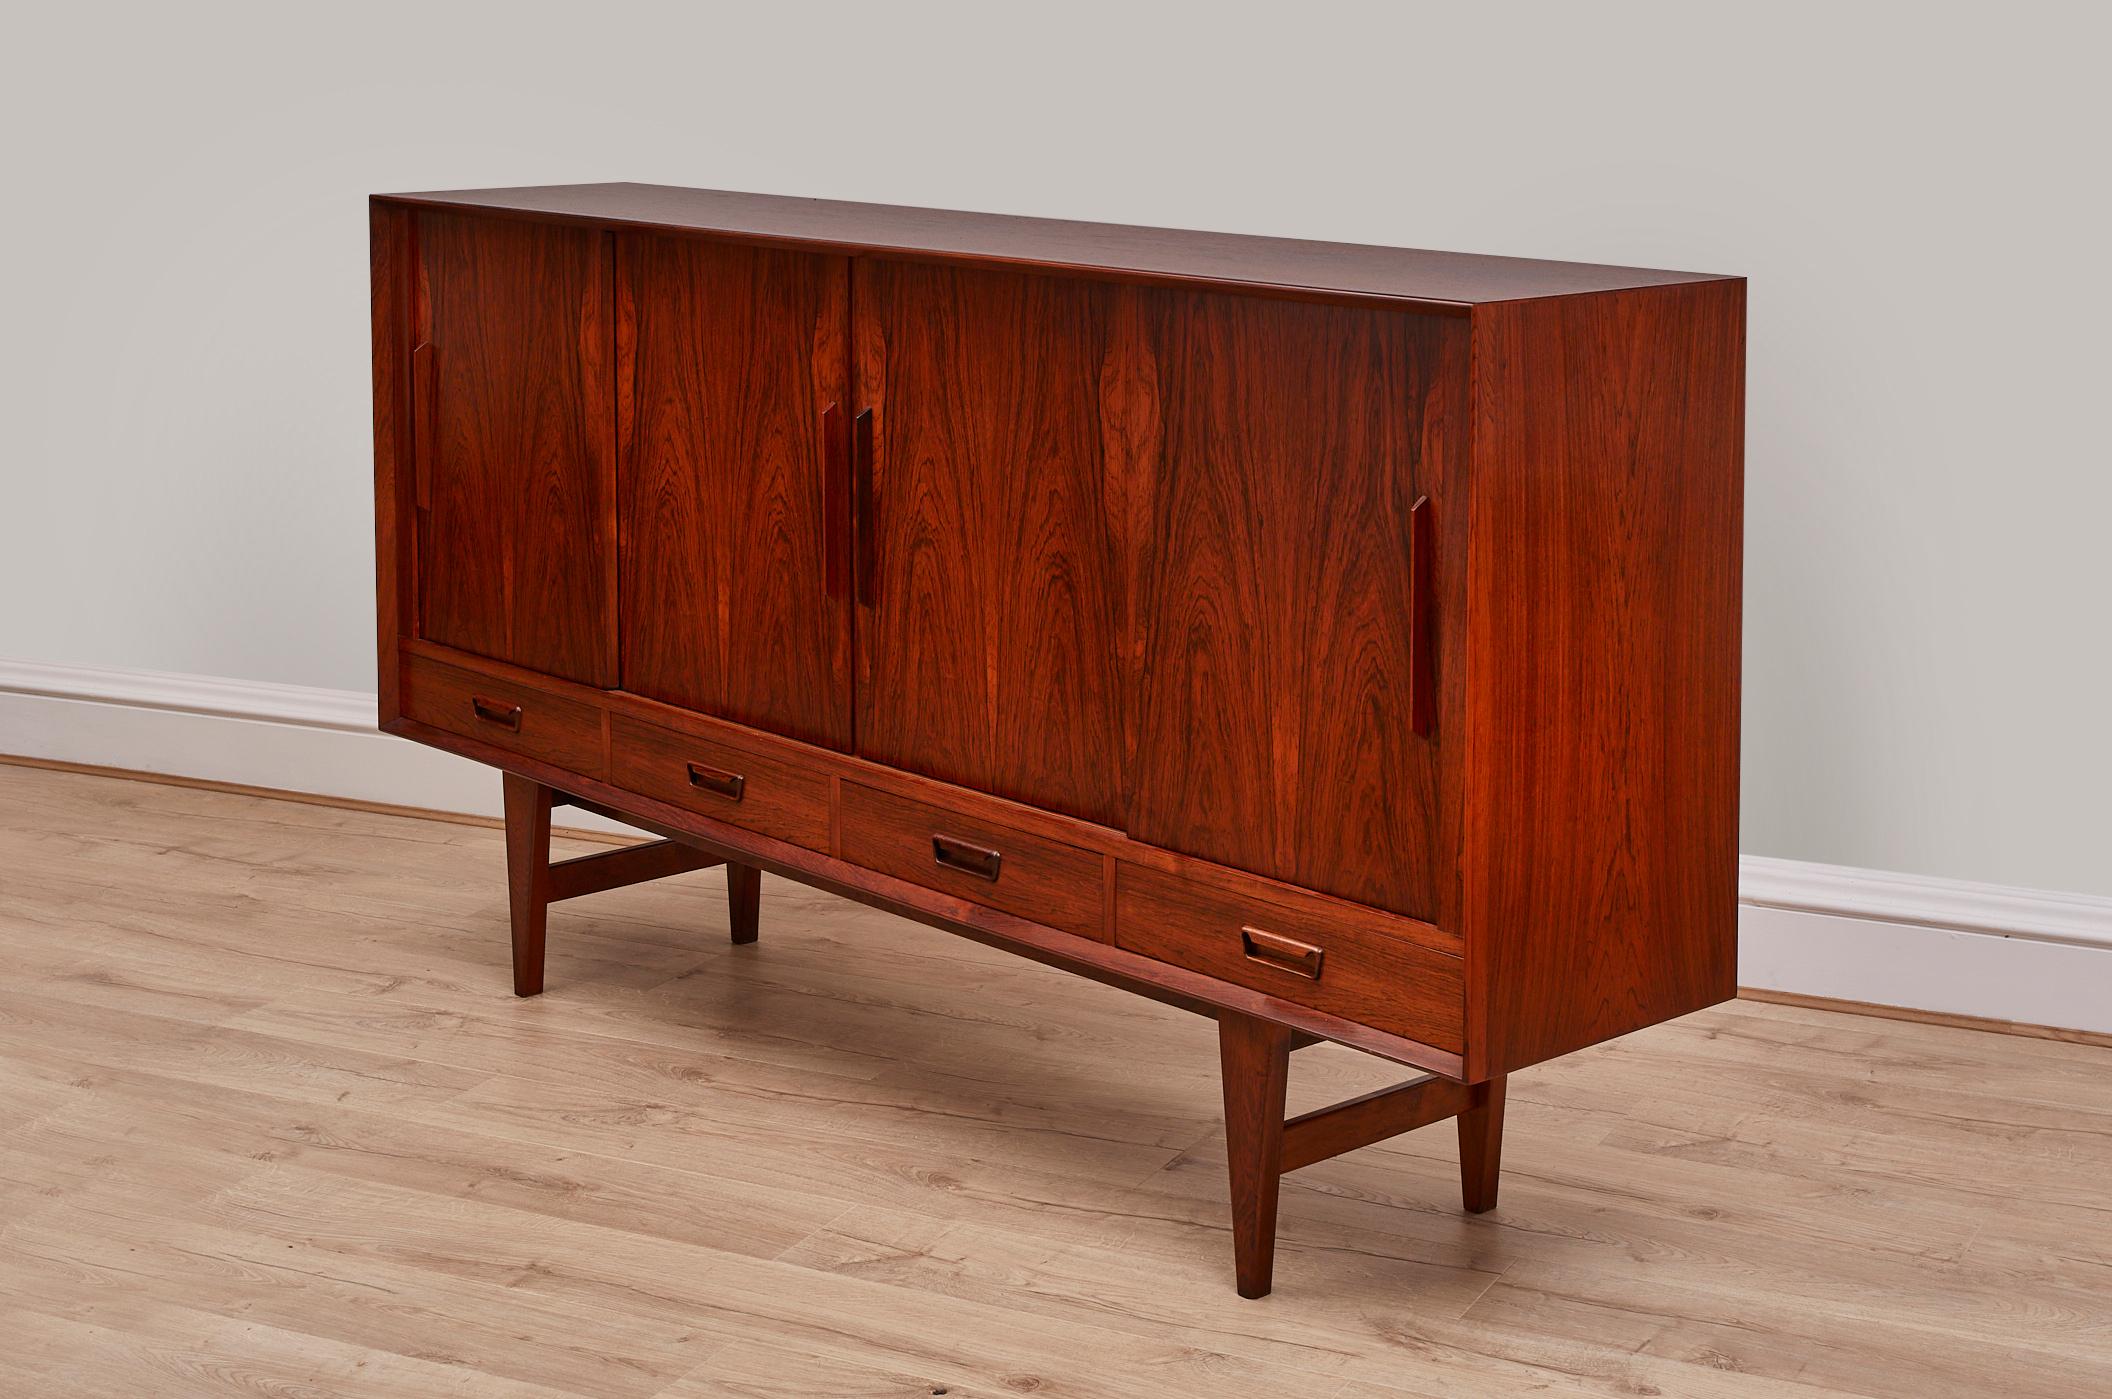 Step back in time with this exquisite 1960s Danish sideboard, a true icon of mid-century design. Crafted with precision and a keen eye for style, this sideboard boasts a timeless elegance that will elevate any space. It features four spacious bottom